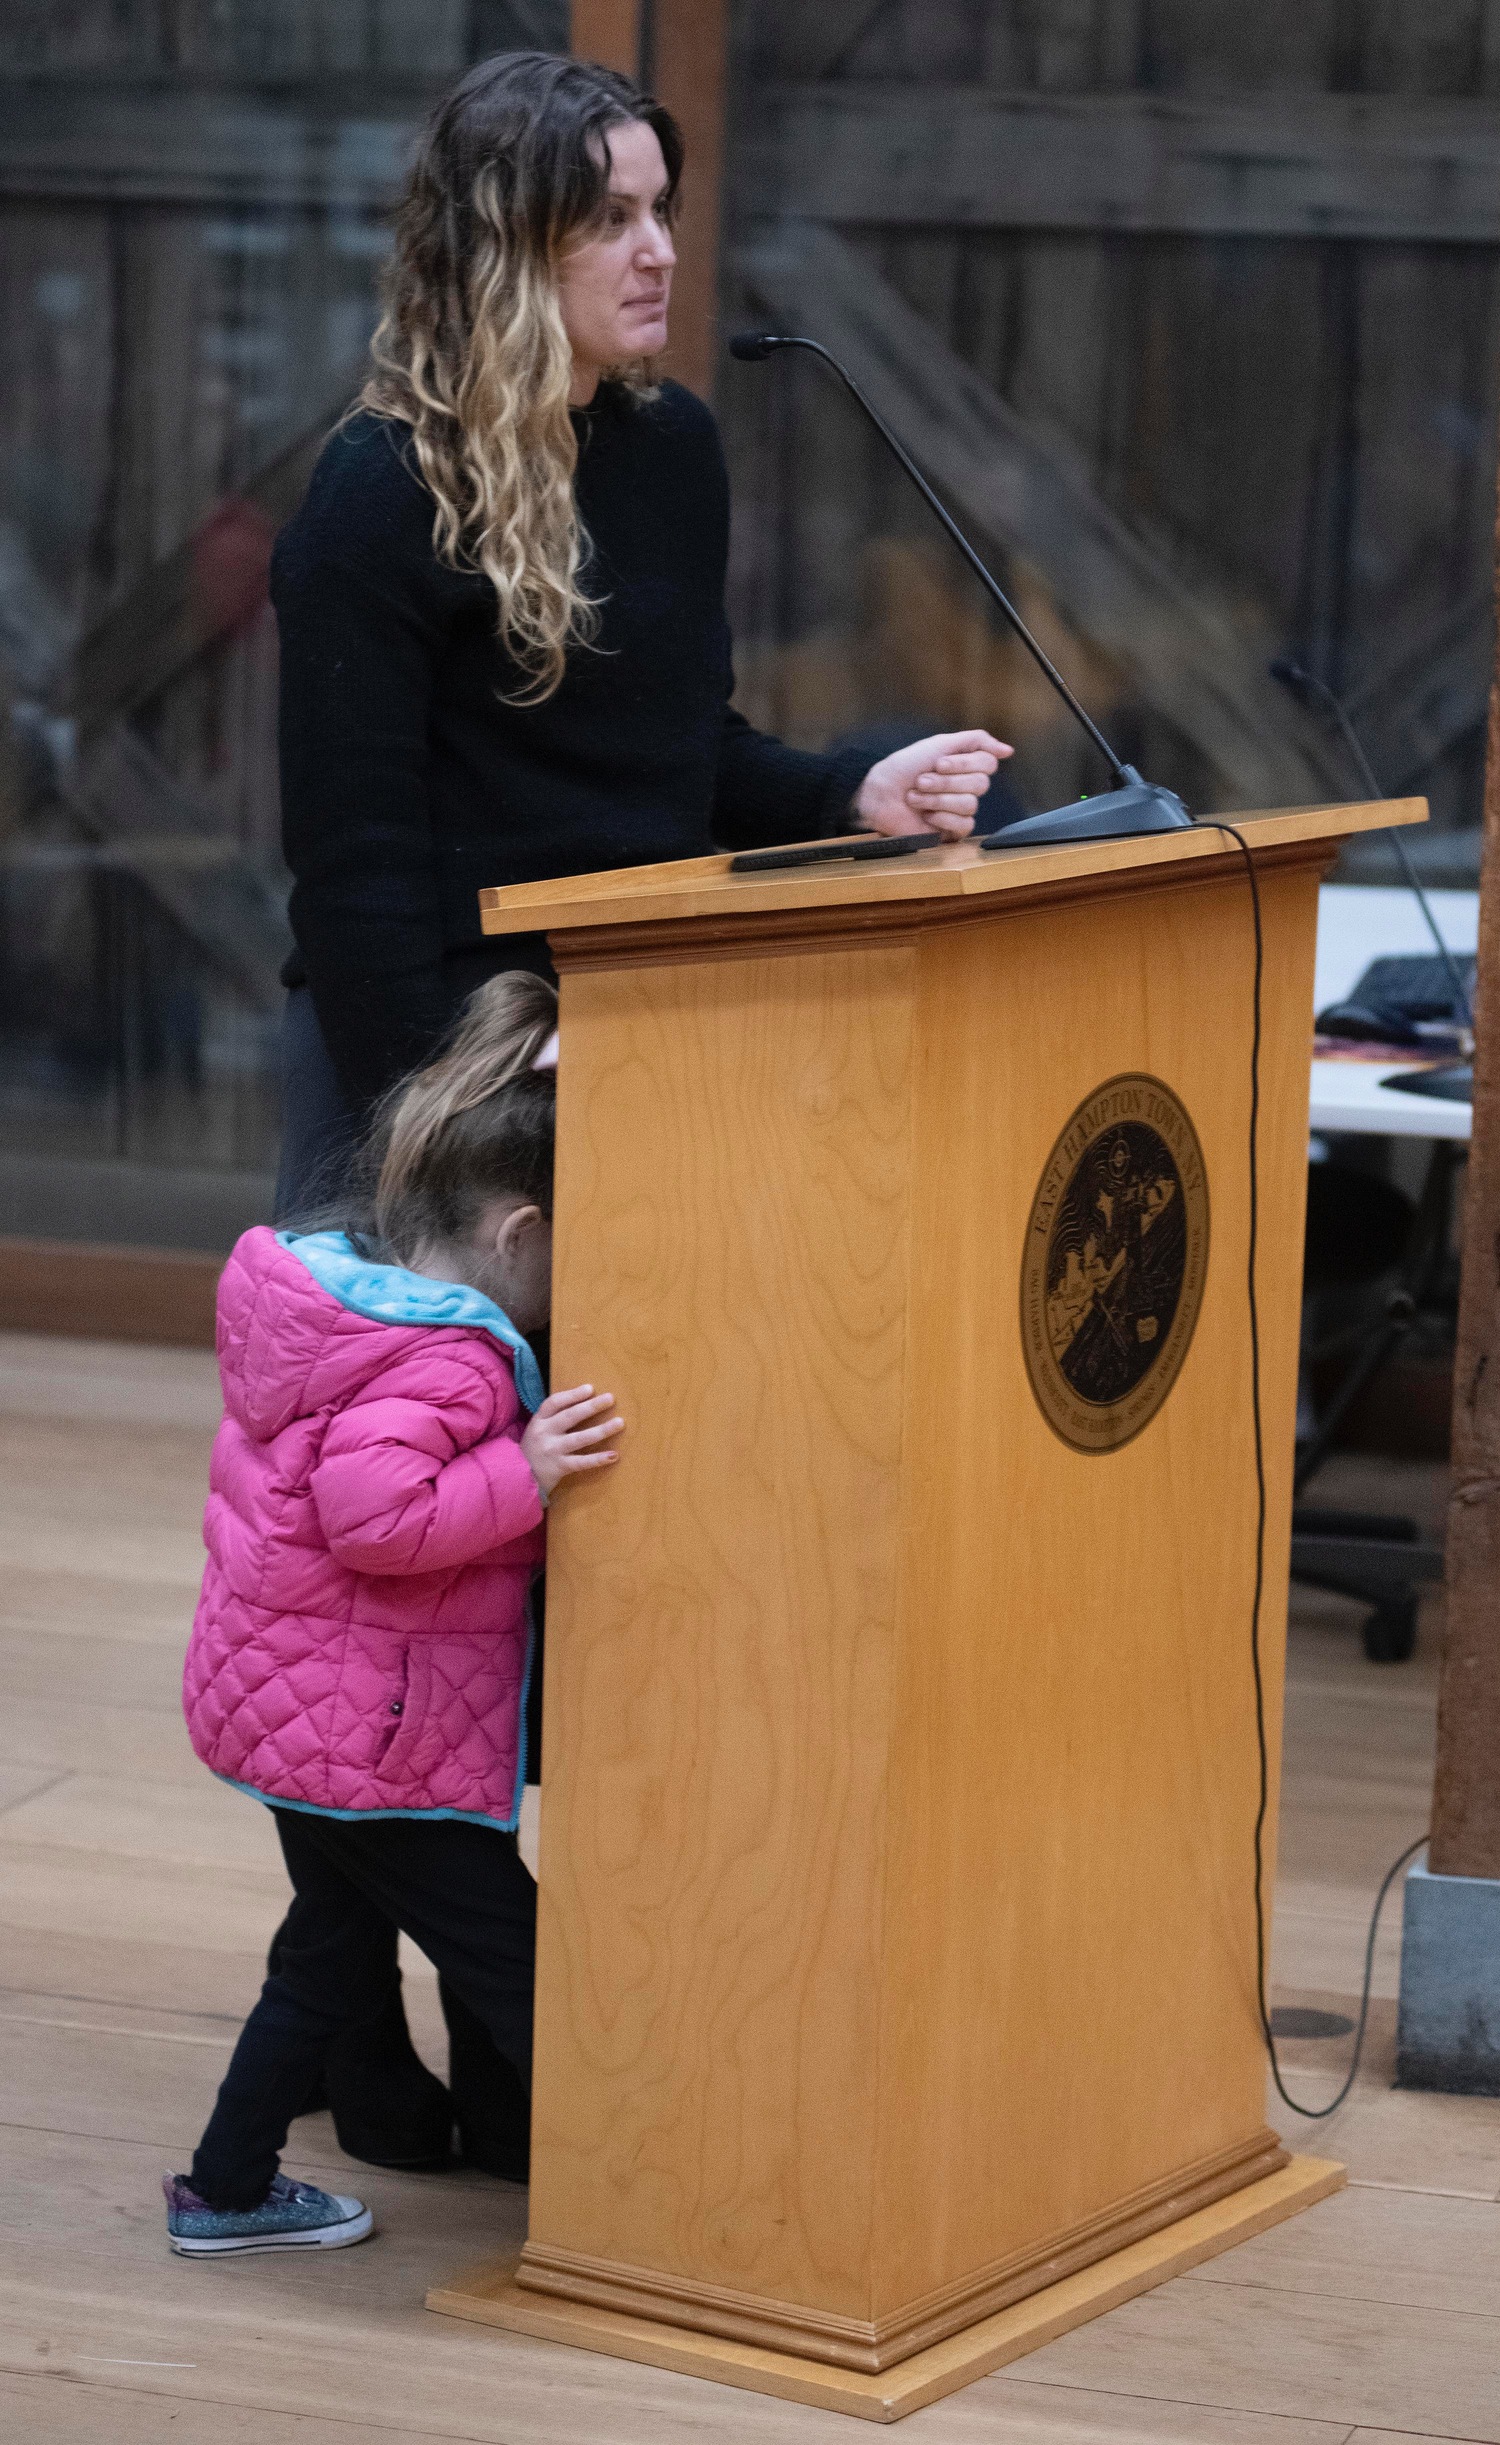 Melissa Brennan and her daughter were among the Montauk residents who came to the East Hampton Town Board meeting on February 1 to plead with the town to subsidize or take over the Montauk Childcare Center to ensure stable operations after the current operator announced it would pull out in May. DOUG KUNTZ